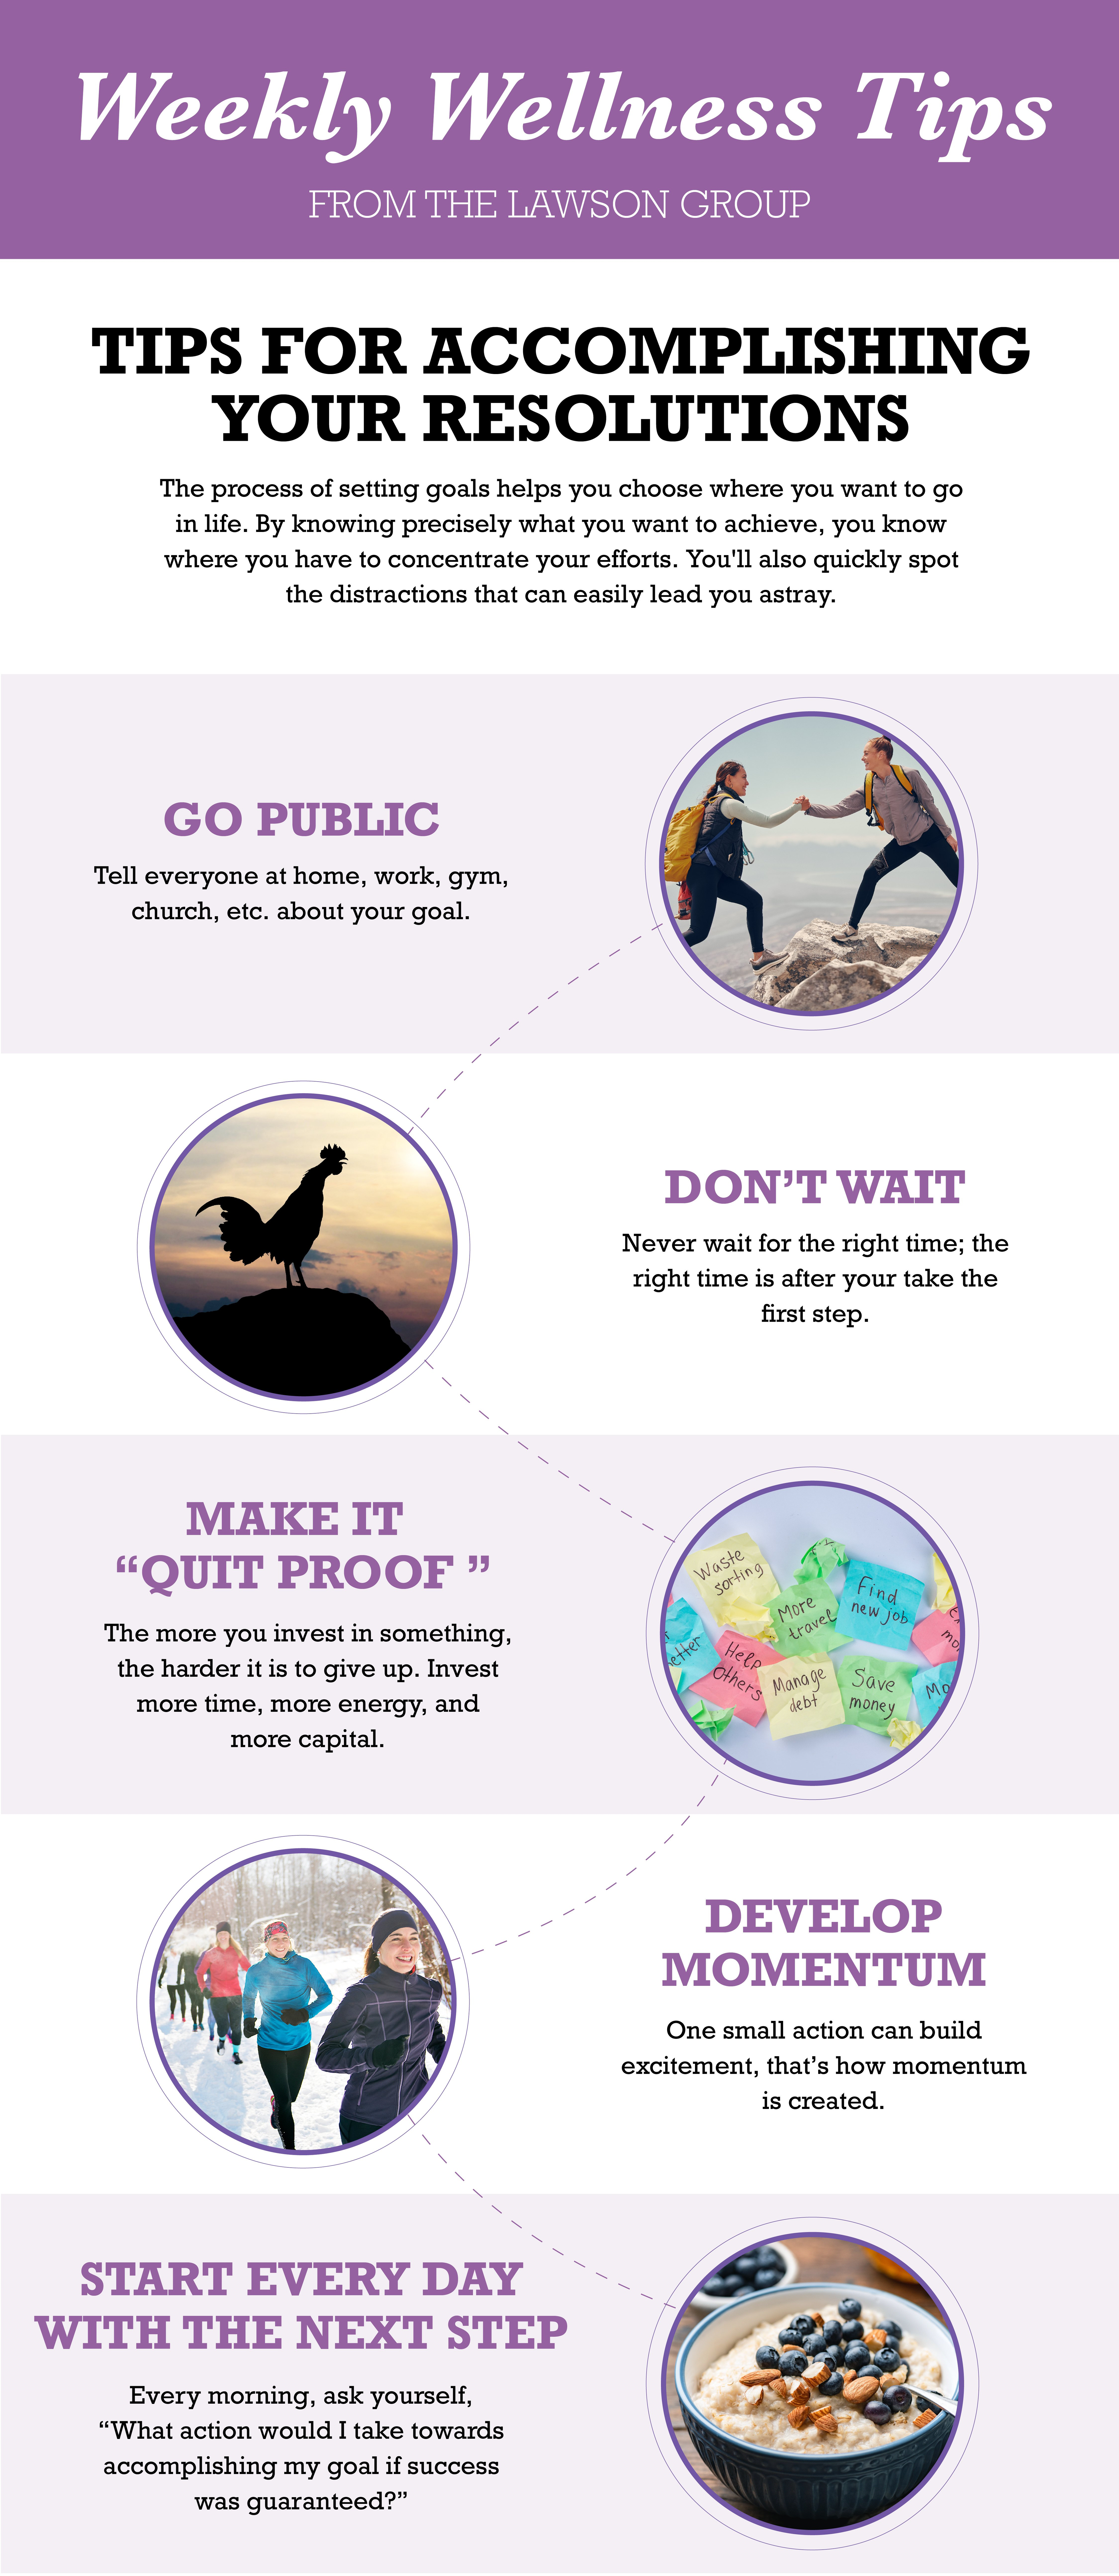 TLG22005 Wellness Tips Tips for Accomplishing Your Resolutions Infographic-1080px-01